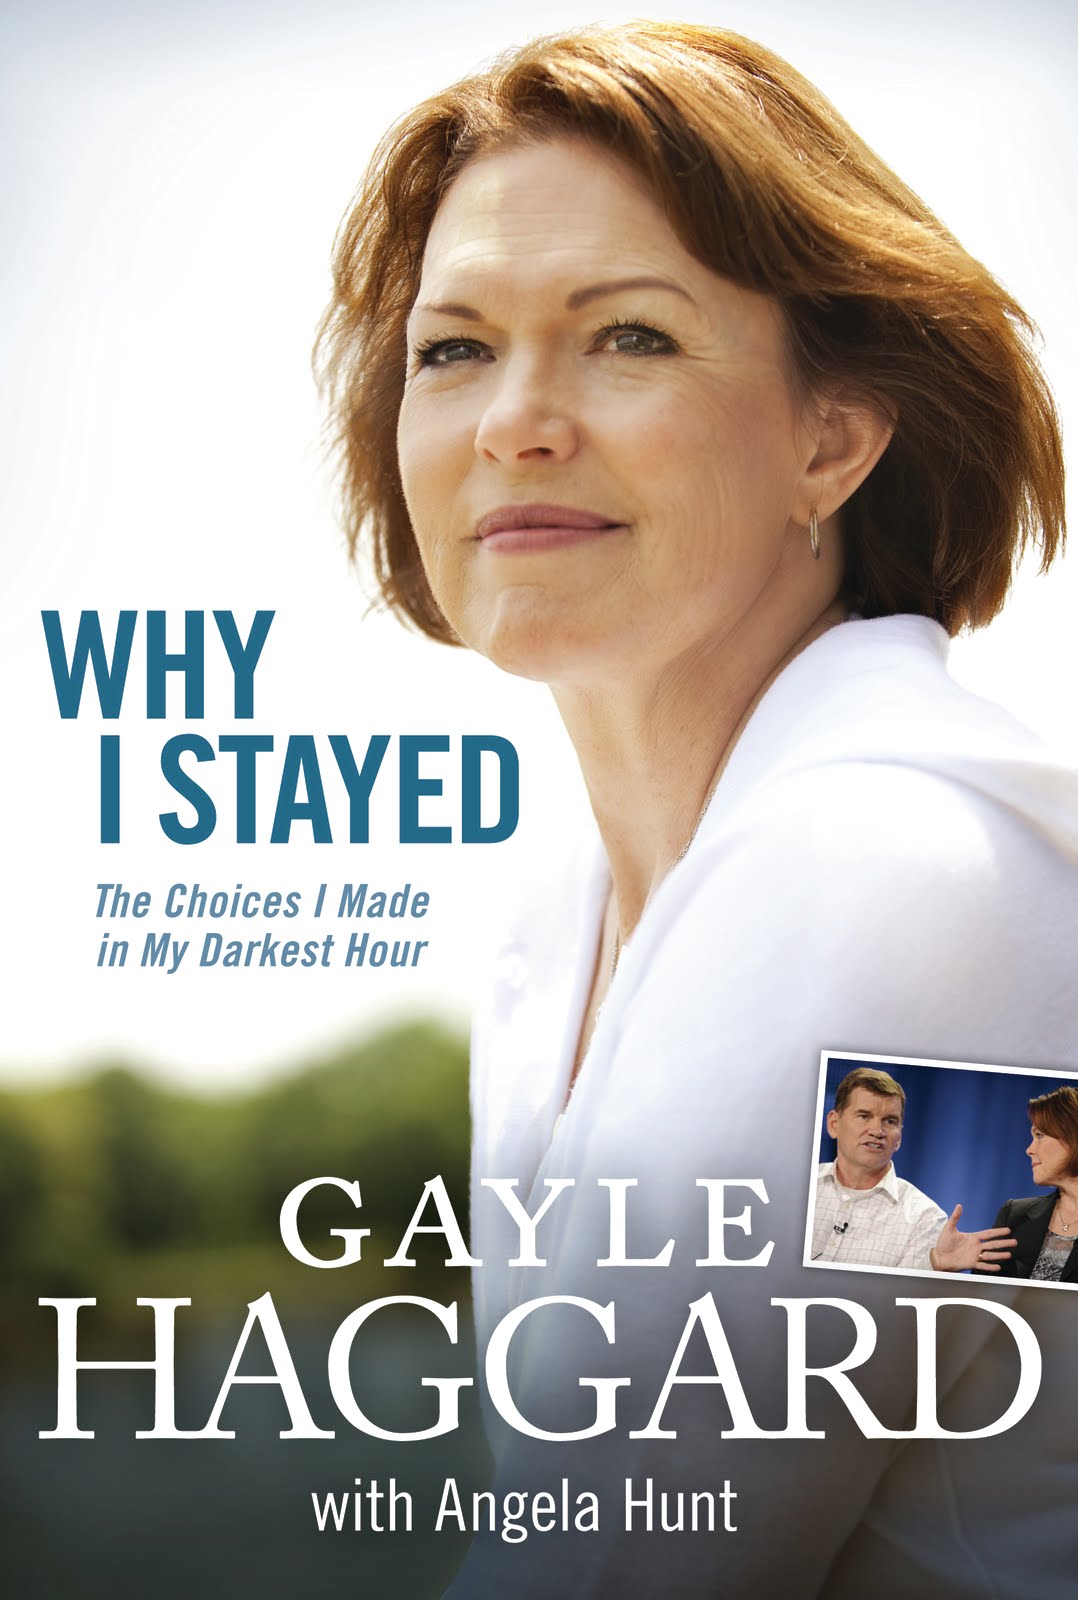 [Why+I+stayed+Cover.jpg]